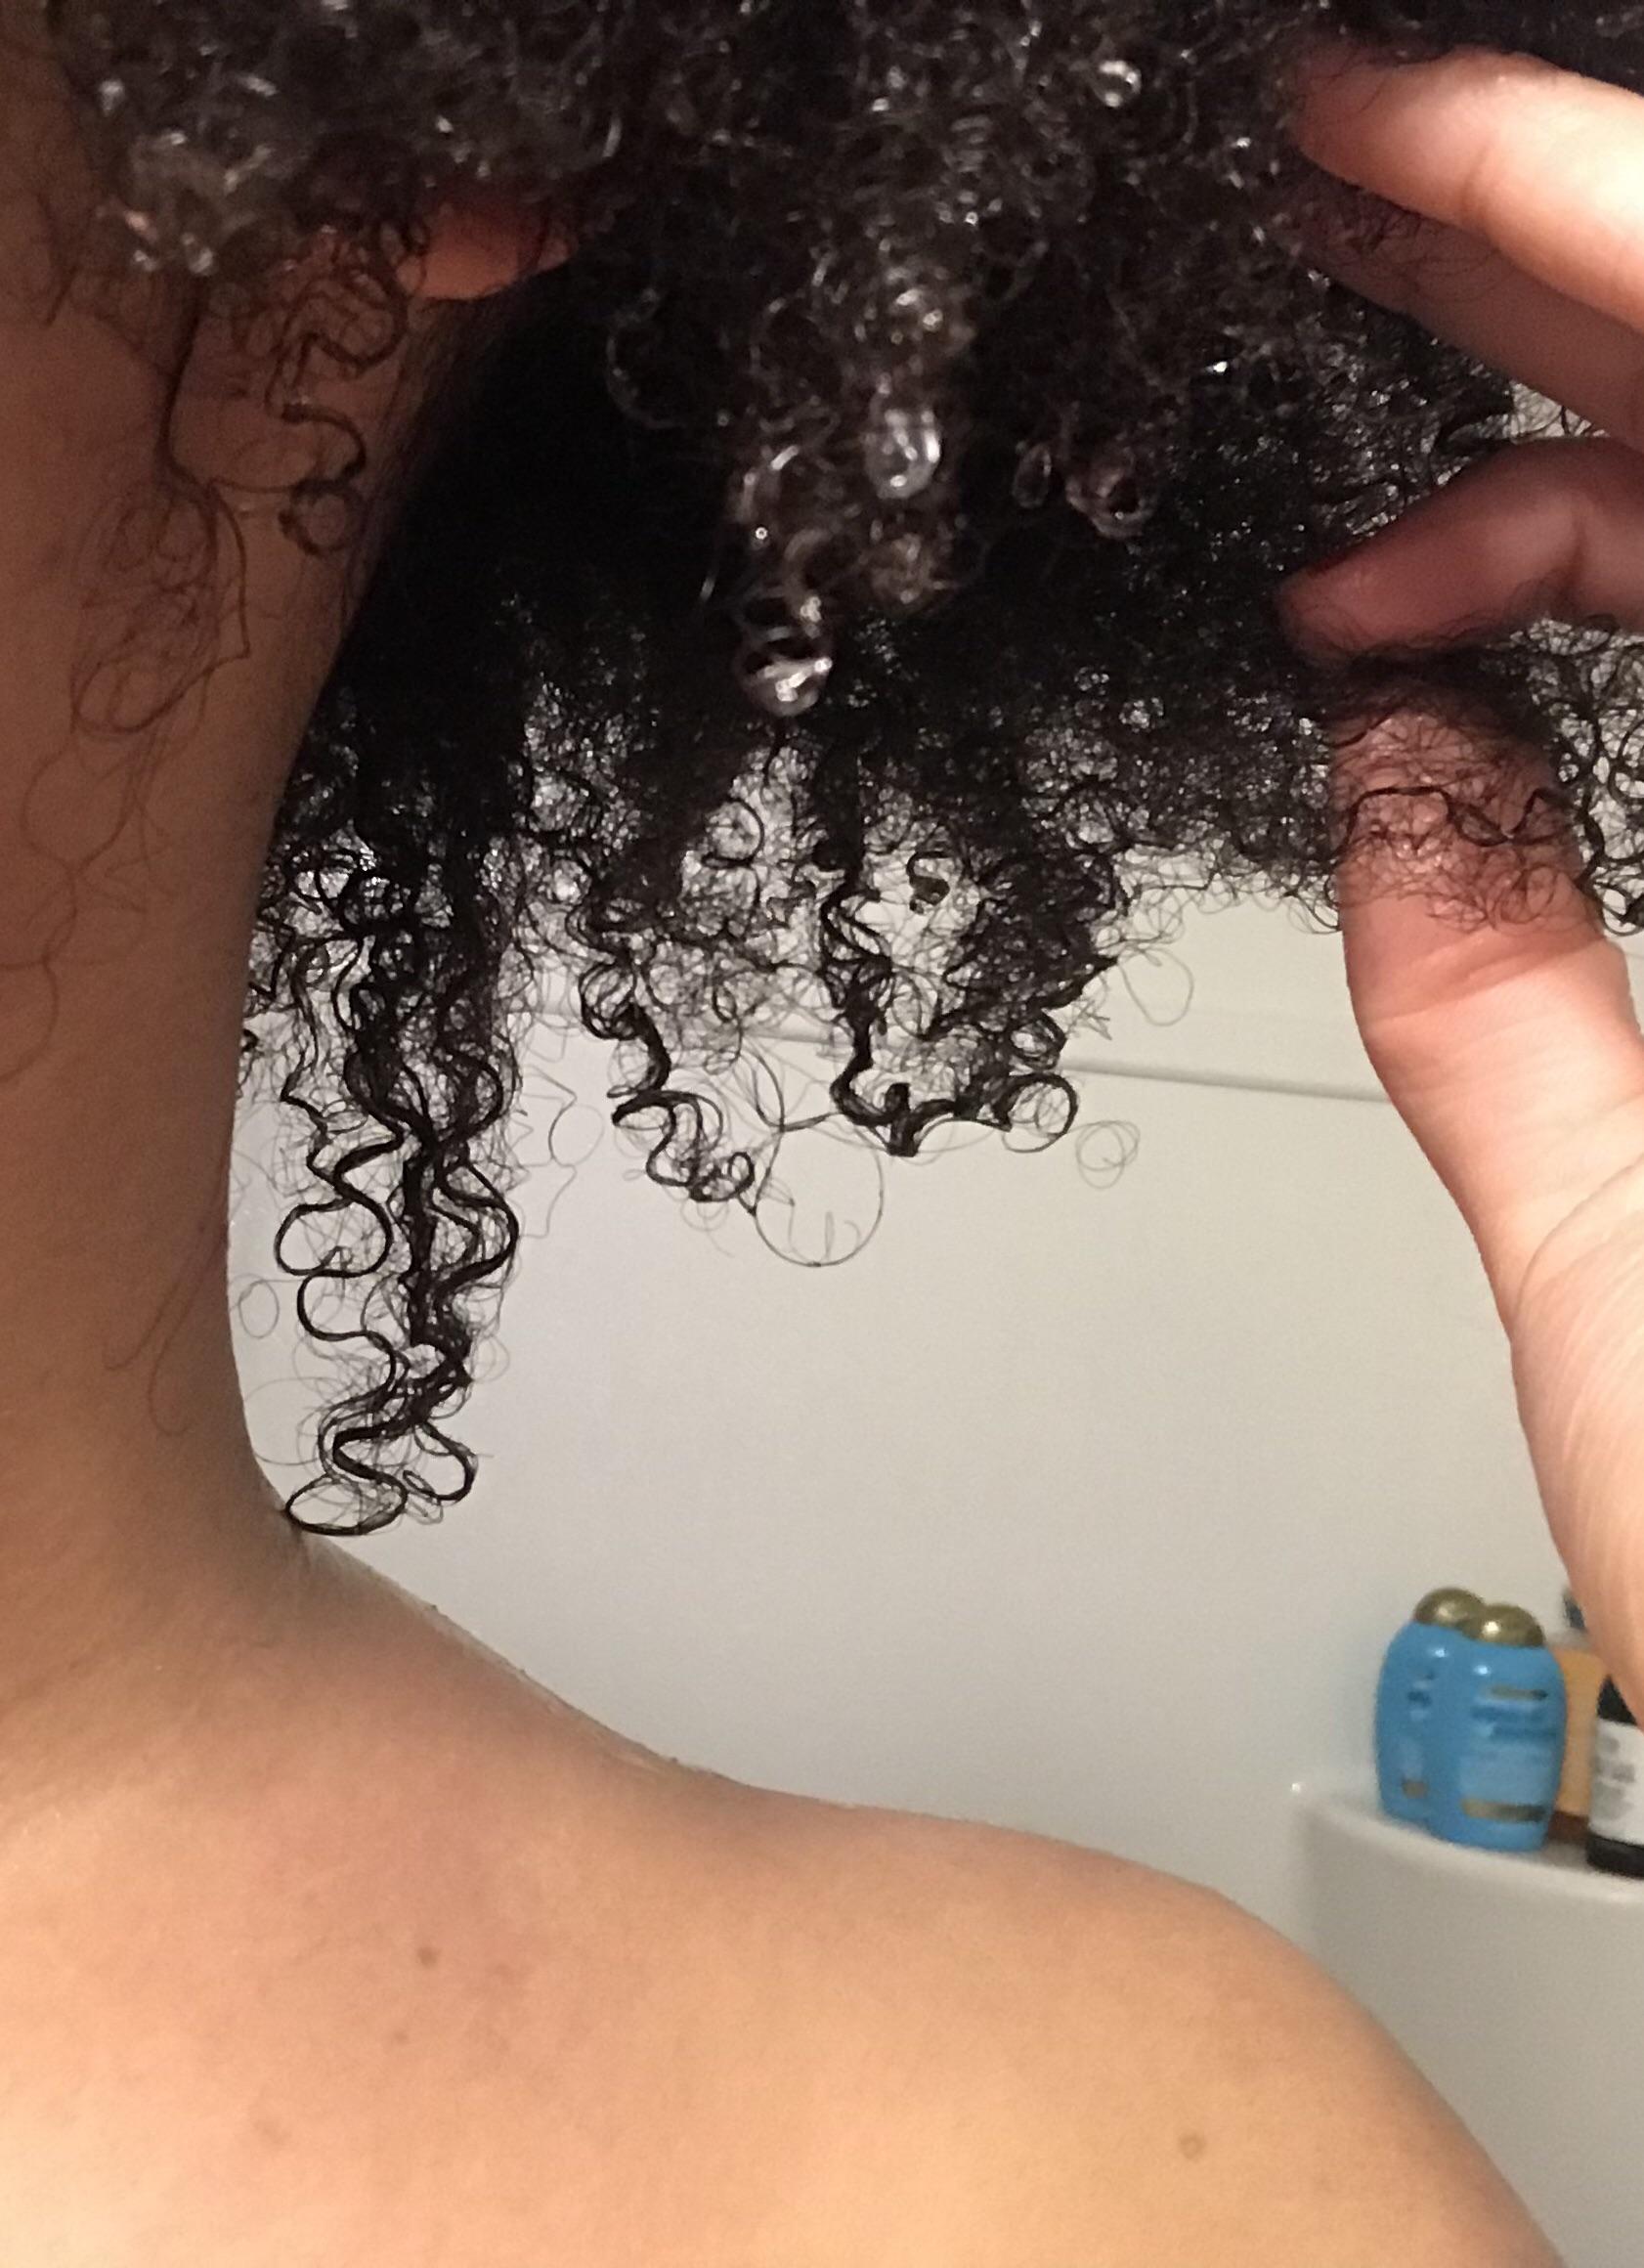 Can someone help me find my hair type/ give me tips on how to combat frizz?